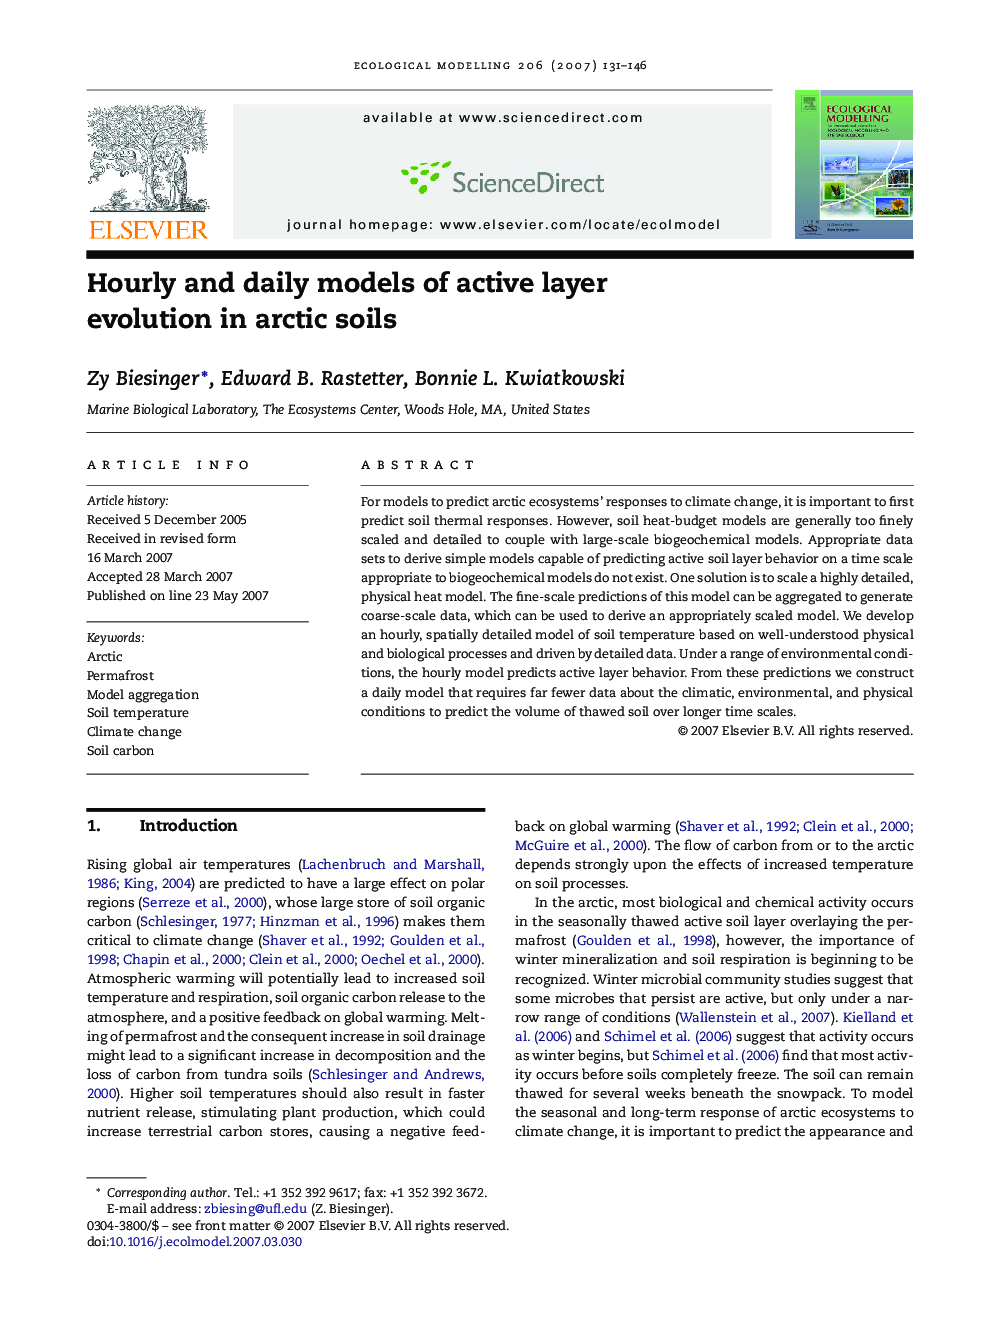 Hourly and daily models of active layer evolution in arctic soils